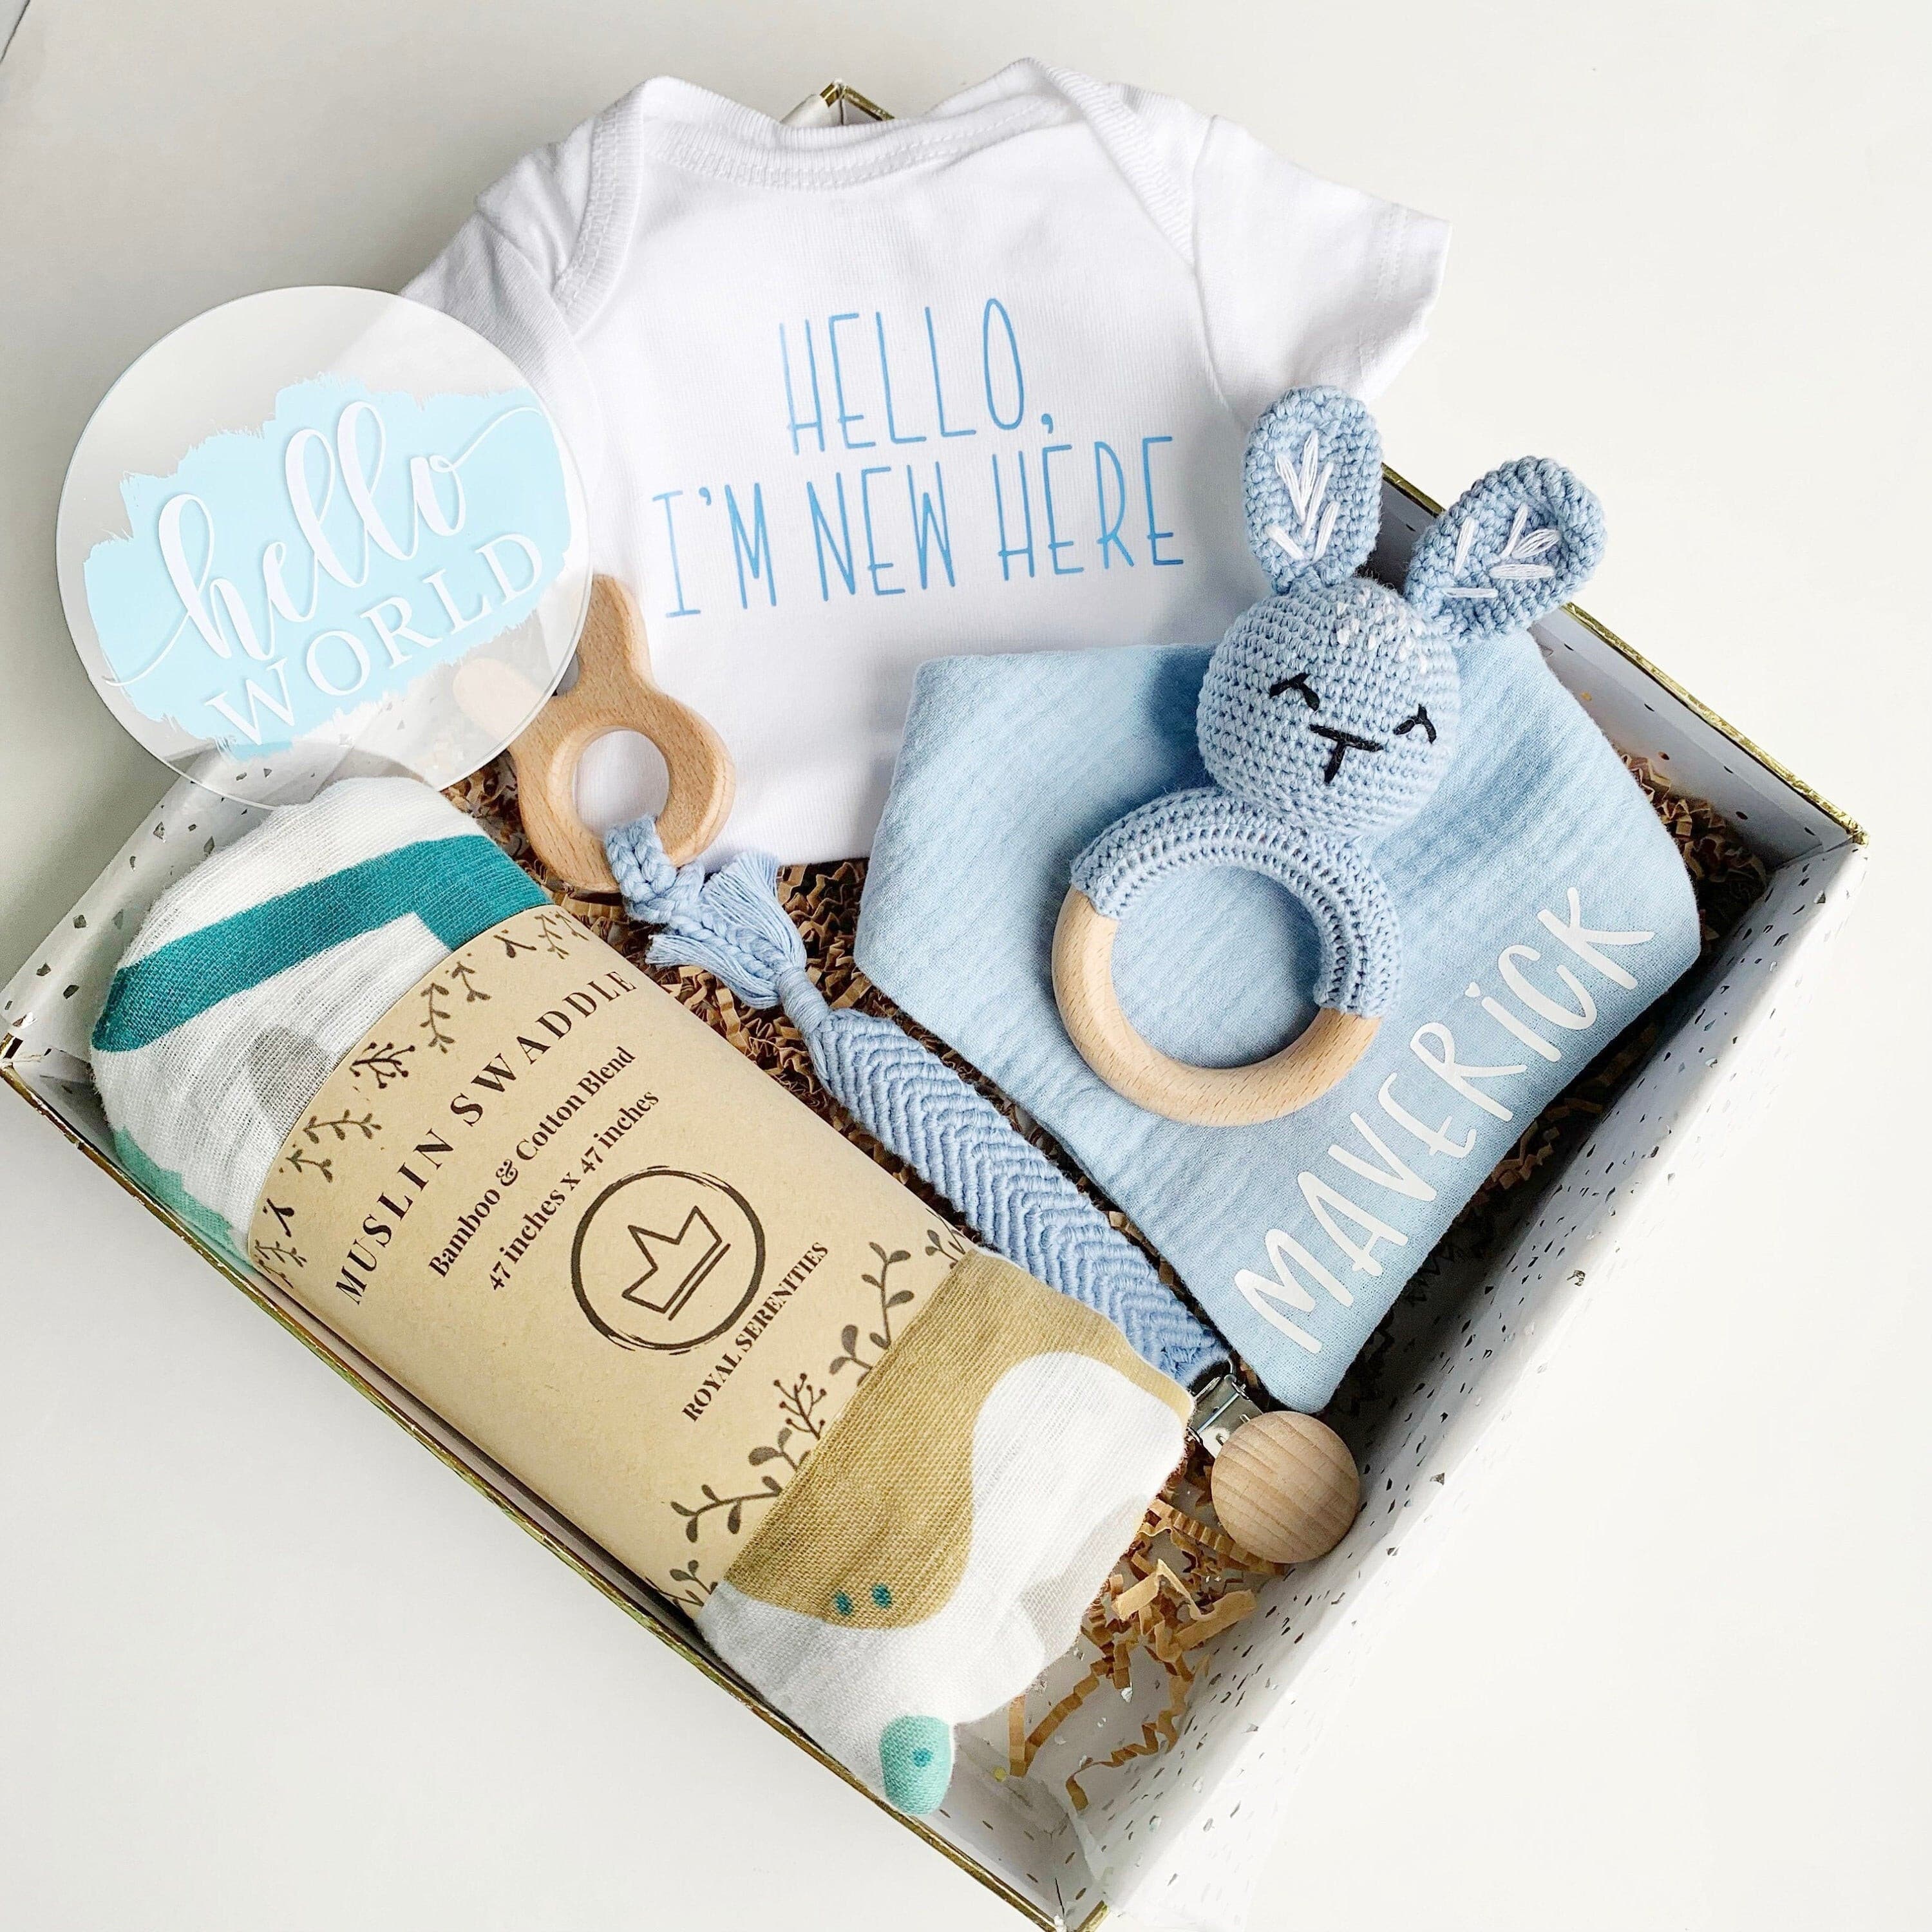 What Do I Put In A Baby Shower Hamper?